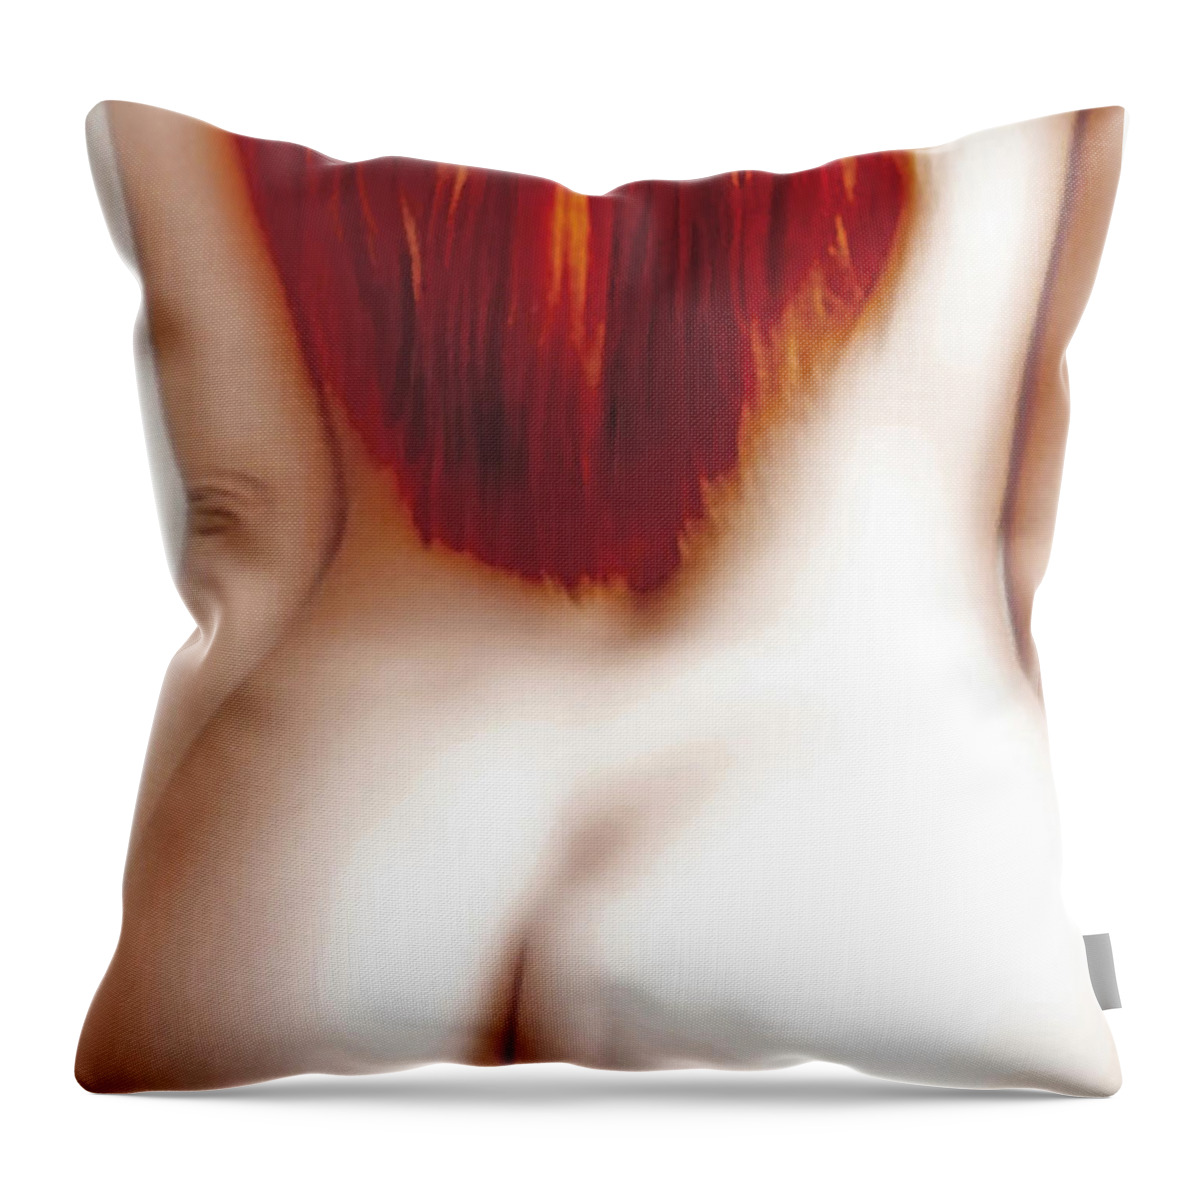 Woman Throw Pillow featuring the photograph Red Temptation by Joachim G Pinkawa